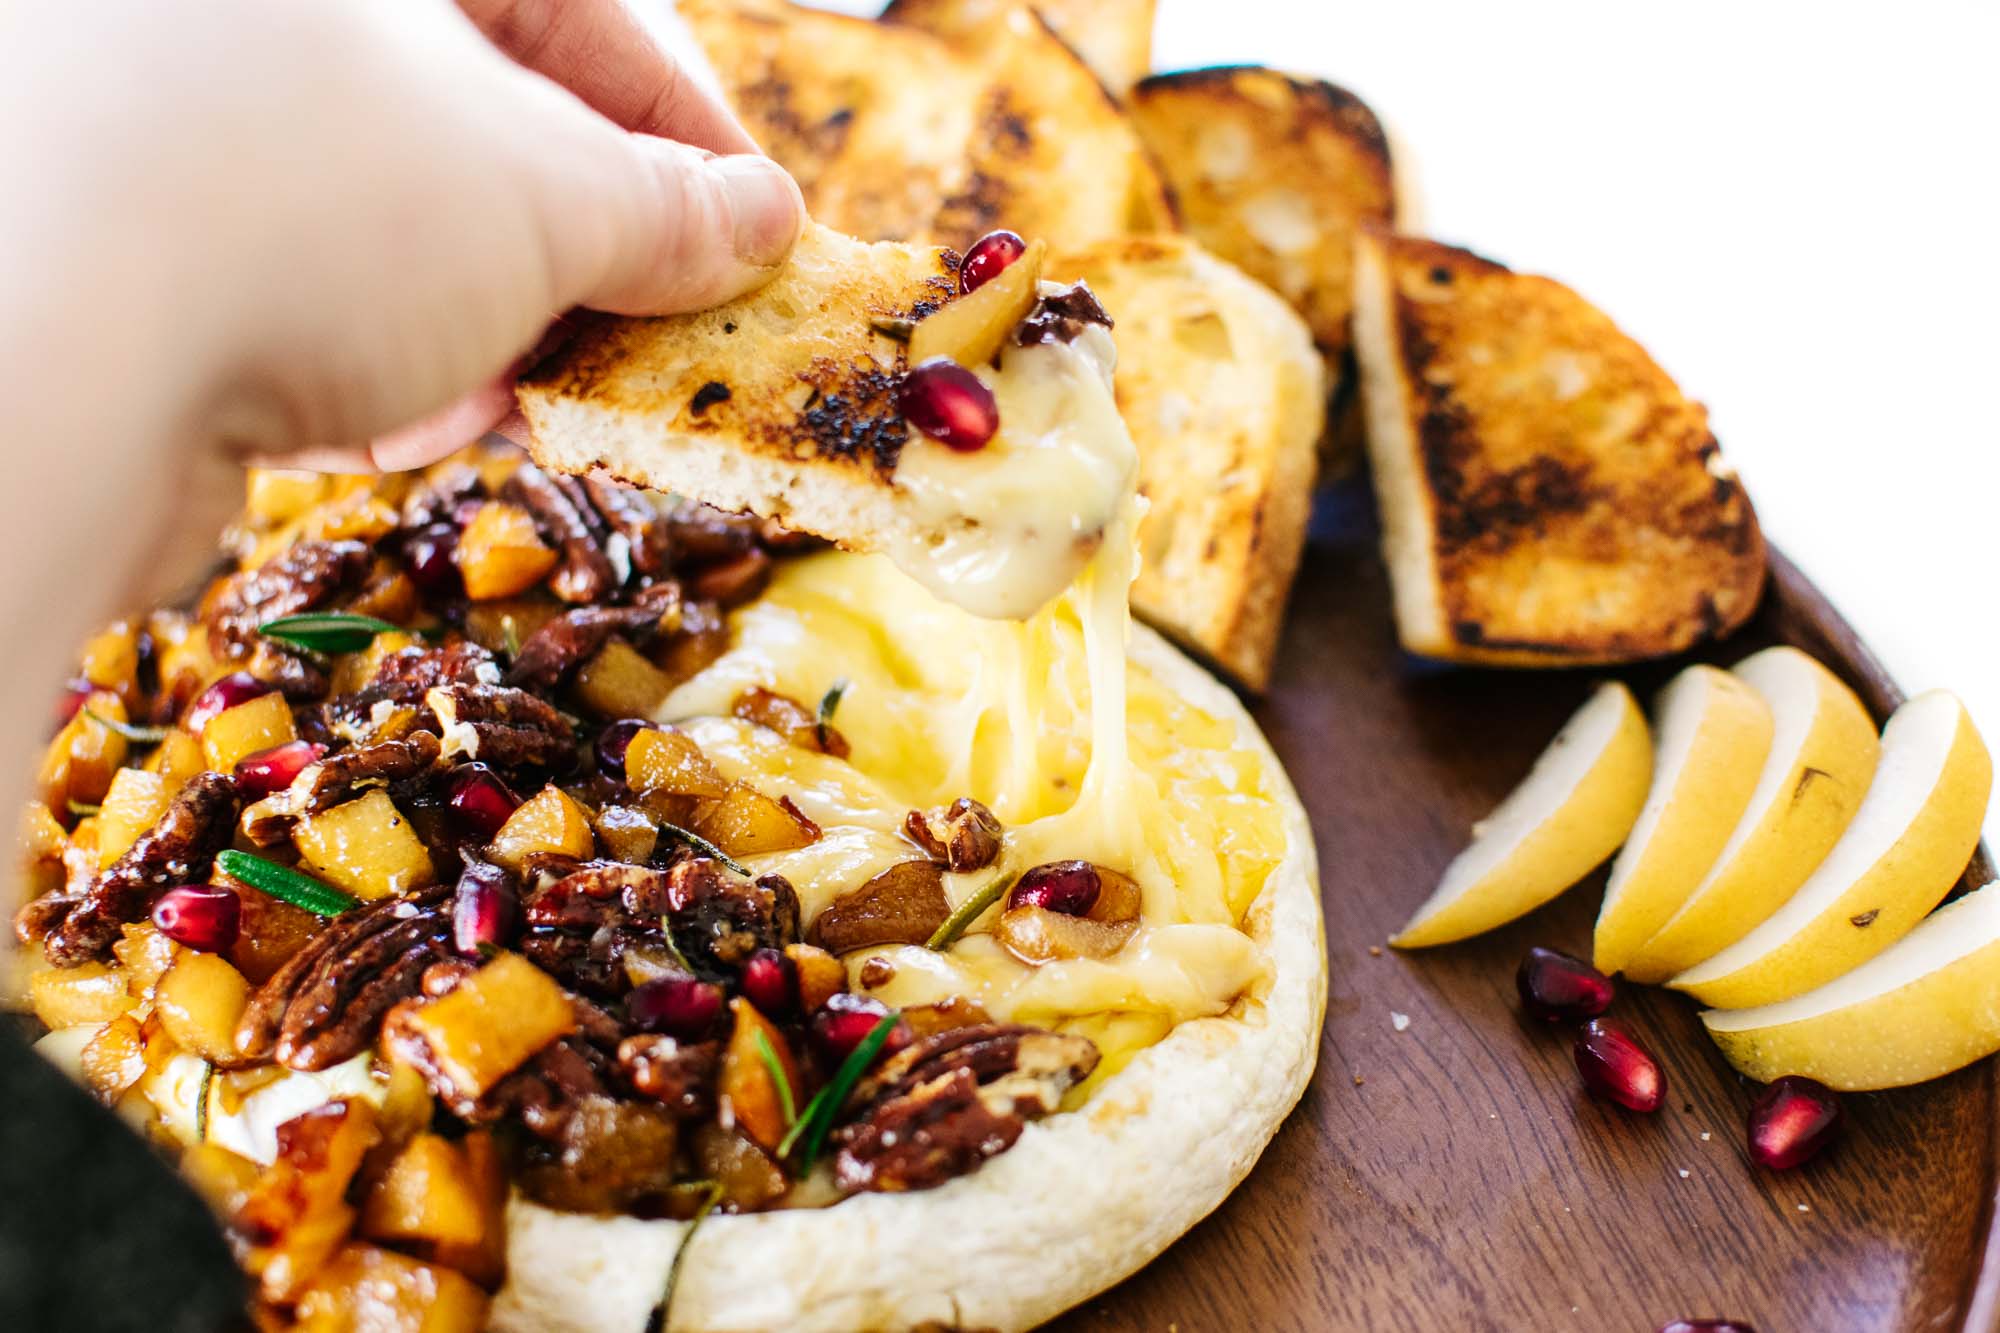 Maple-Rosemary Pear & Pecan Baked Brie